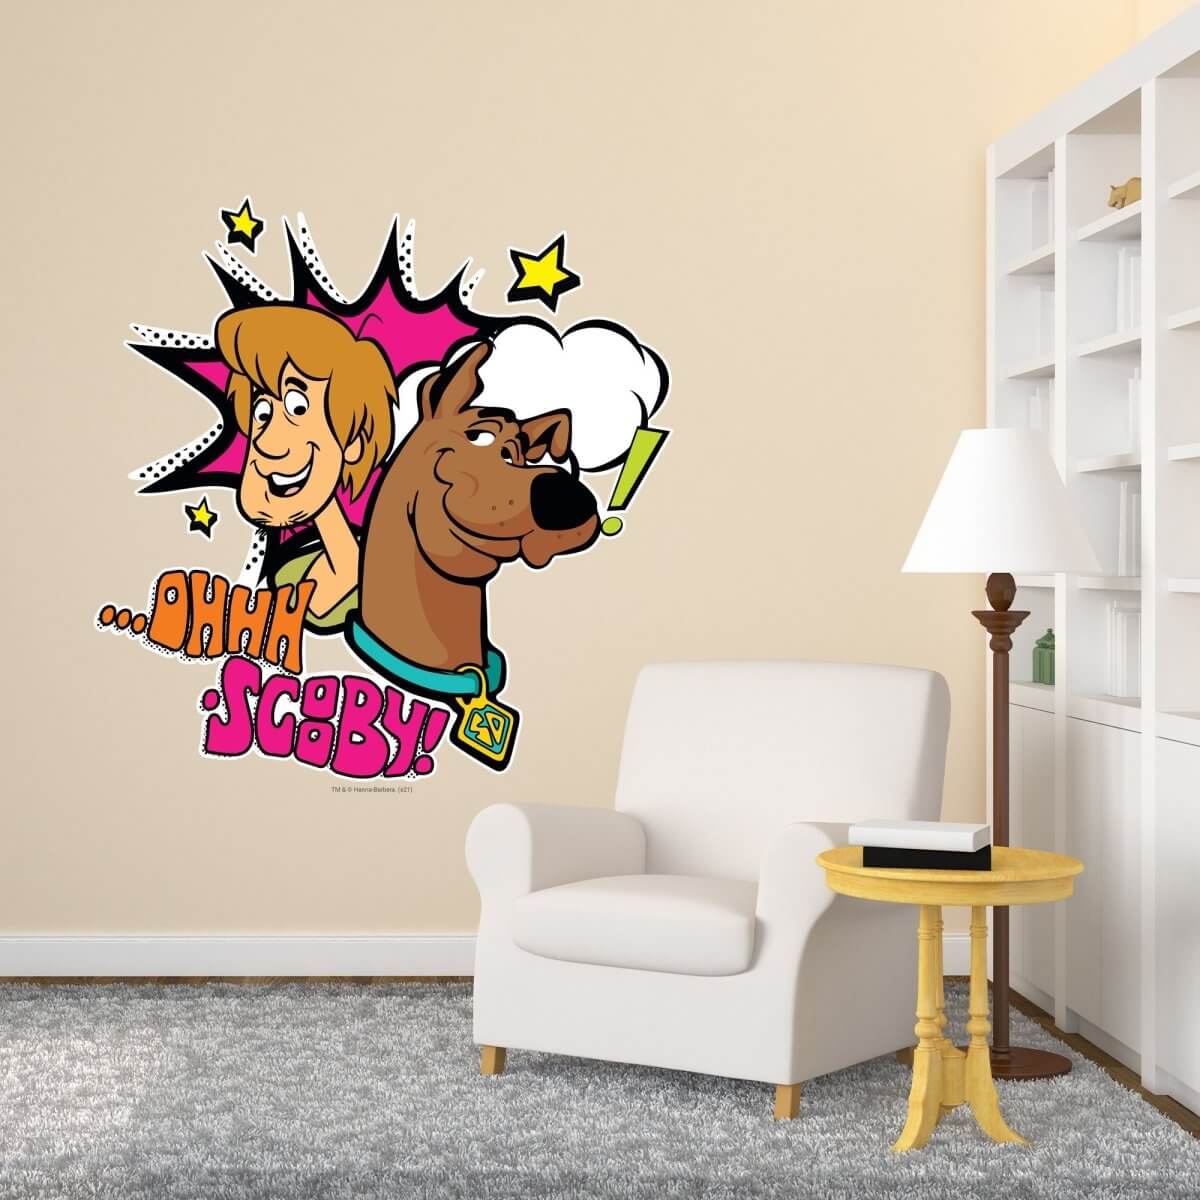 Kismet Decals Home & Room Decor Scooby-Doo and Shaggy Best Friends Forever Wall decal sticker - officially licensed - latex printed with no solvent odor - Kismet Decals